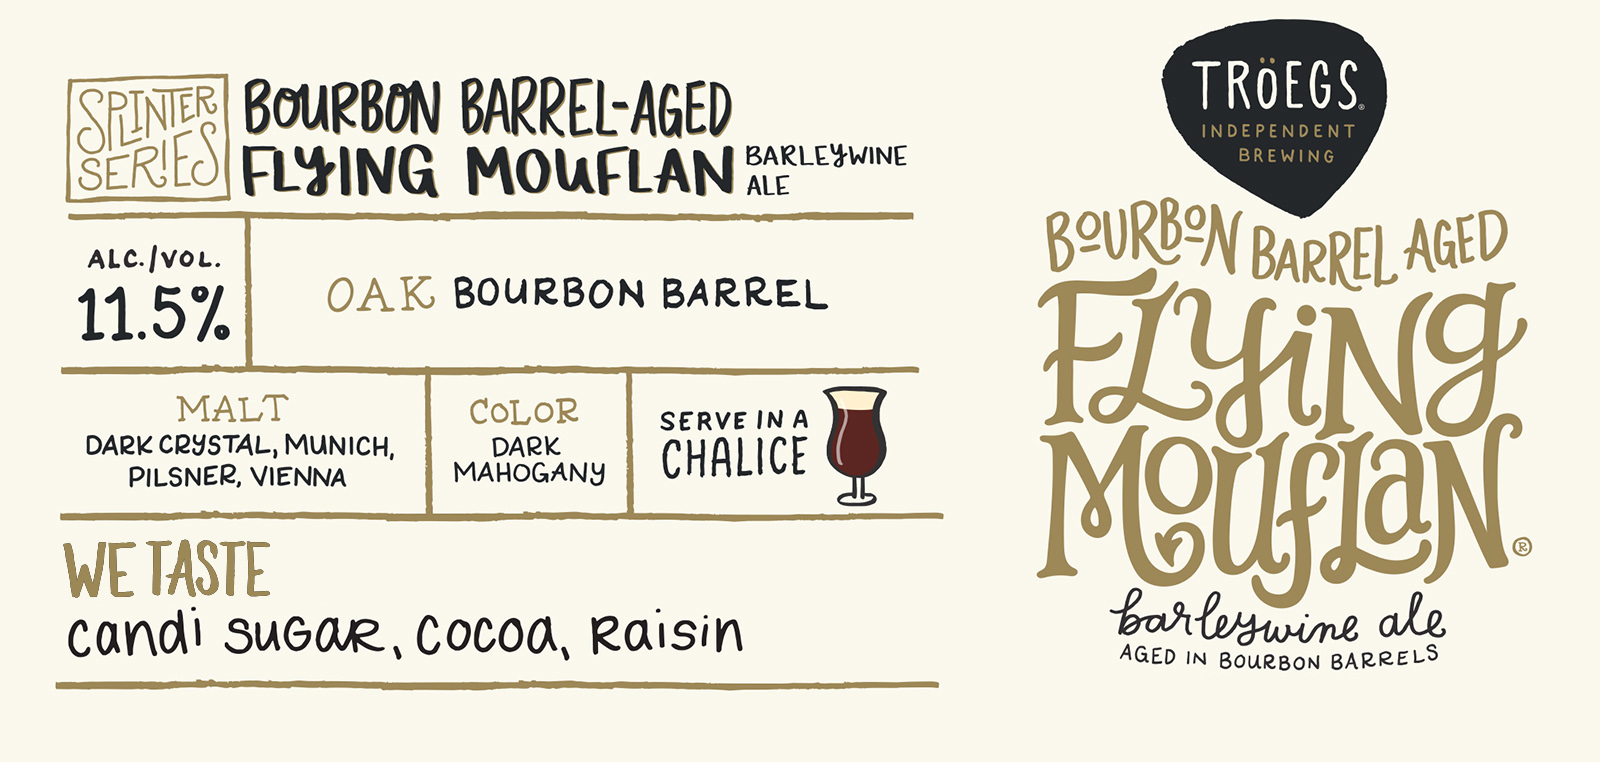 Bourbon Barrel-aged Flying Mouflan info graphic.